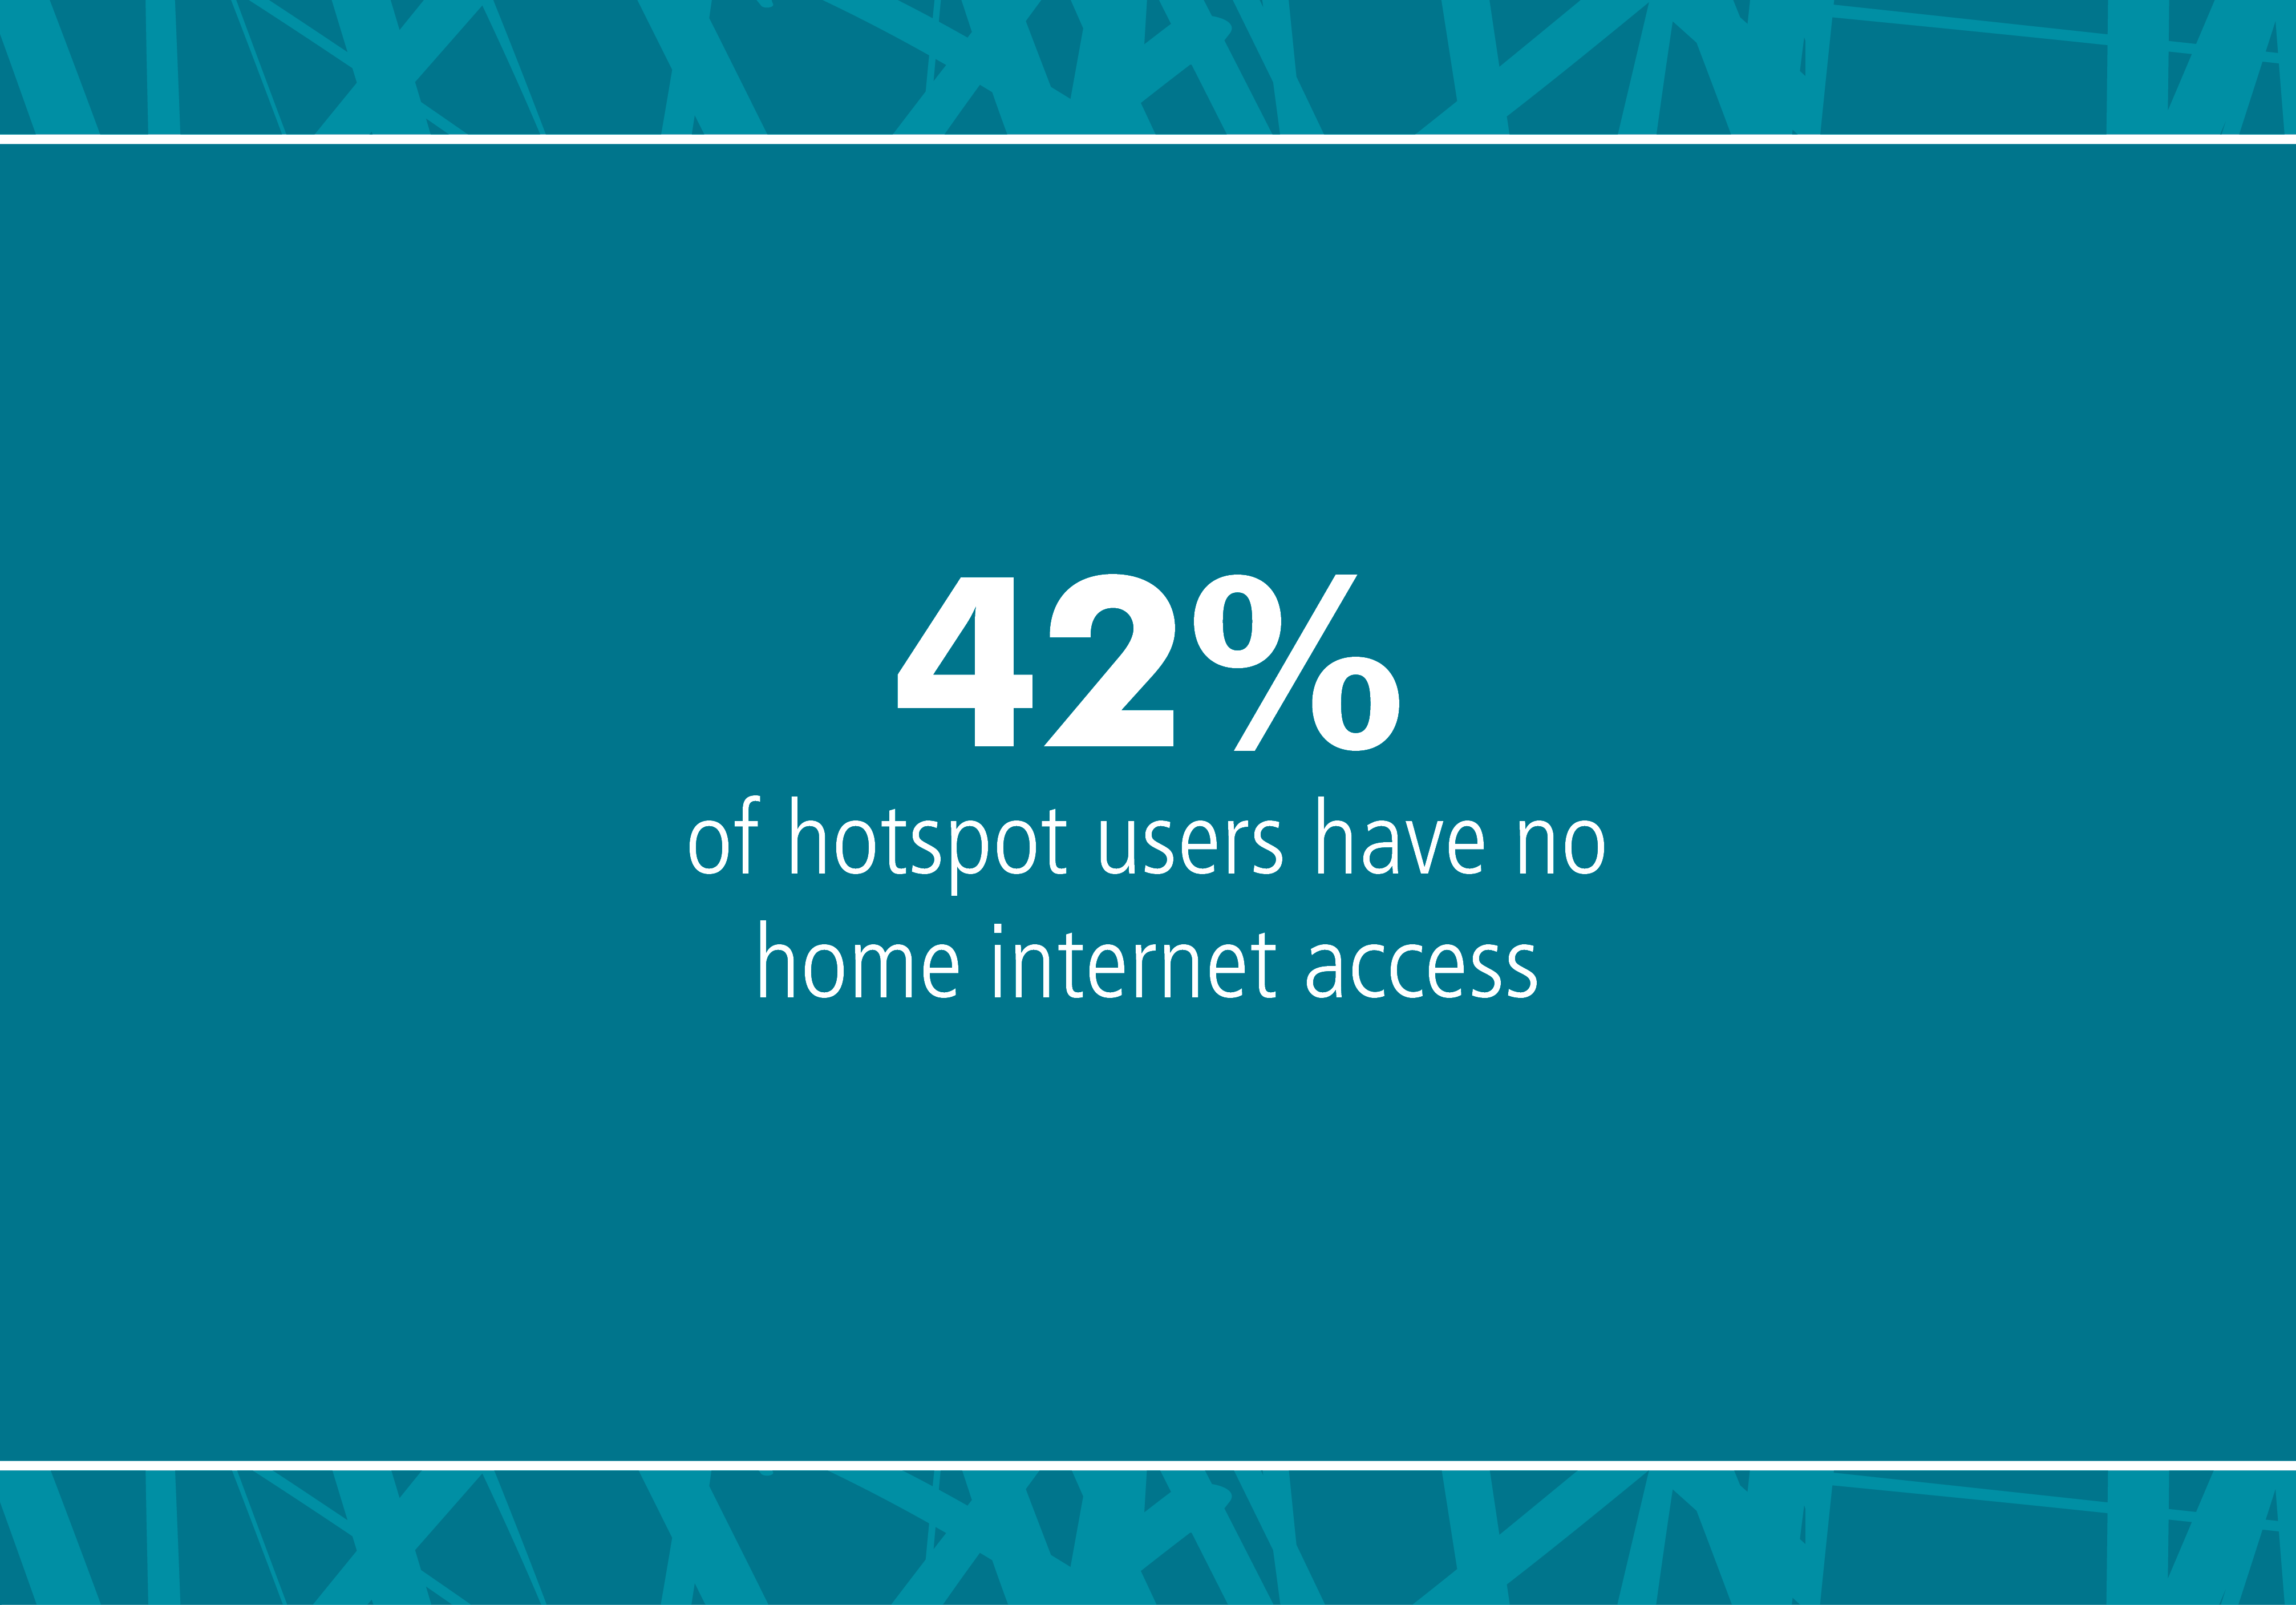 42% of hotspot users have no home internet access